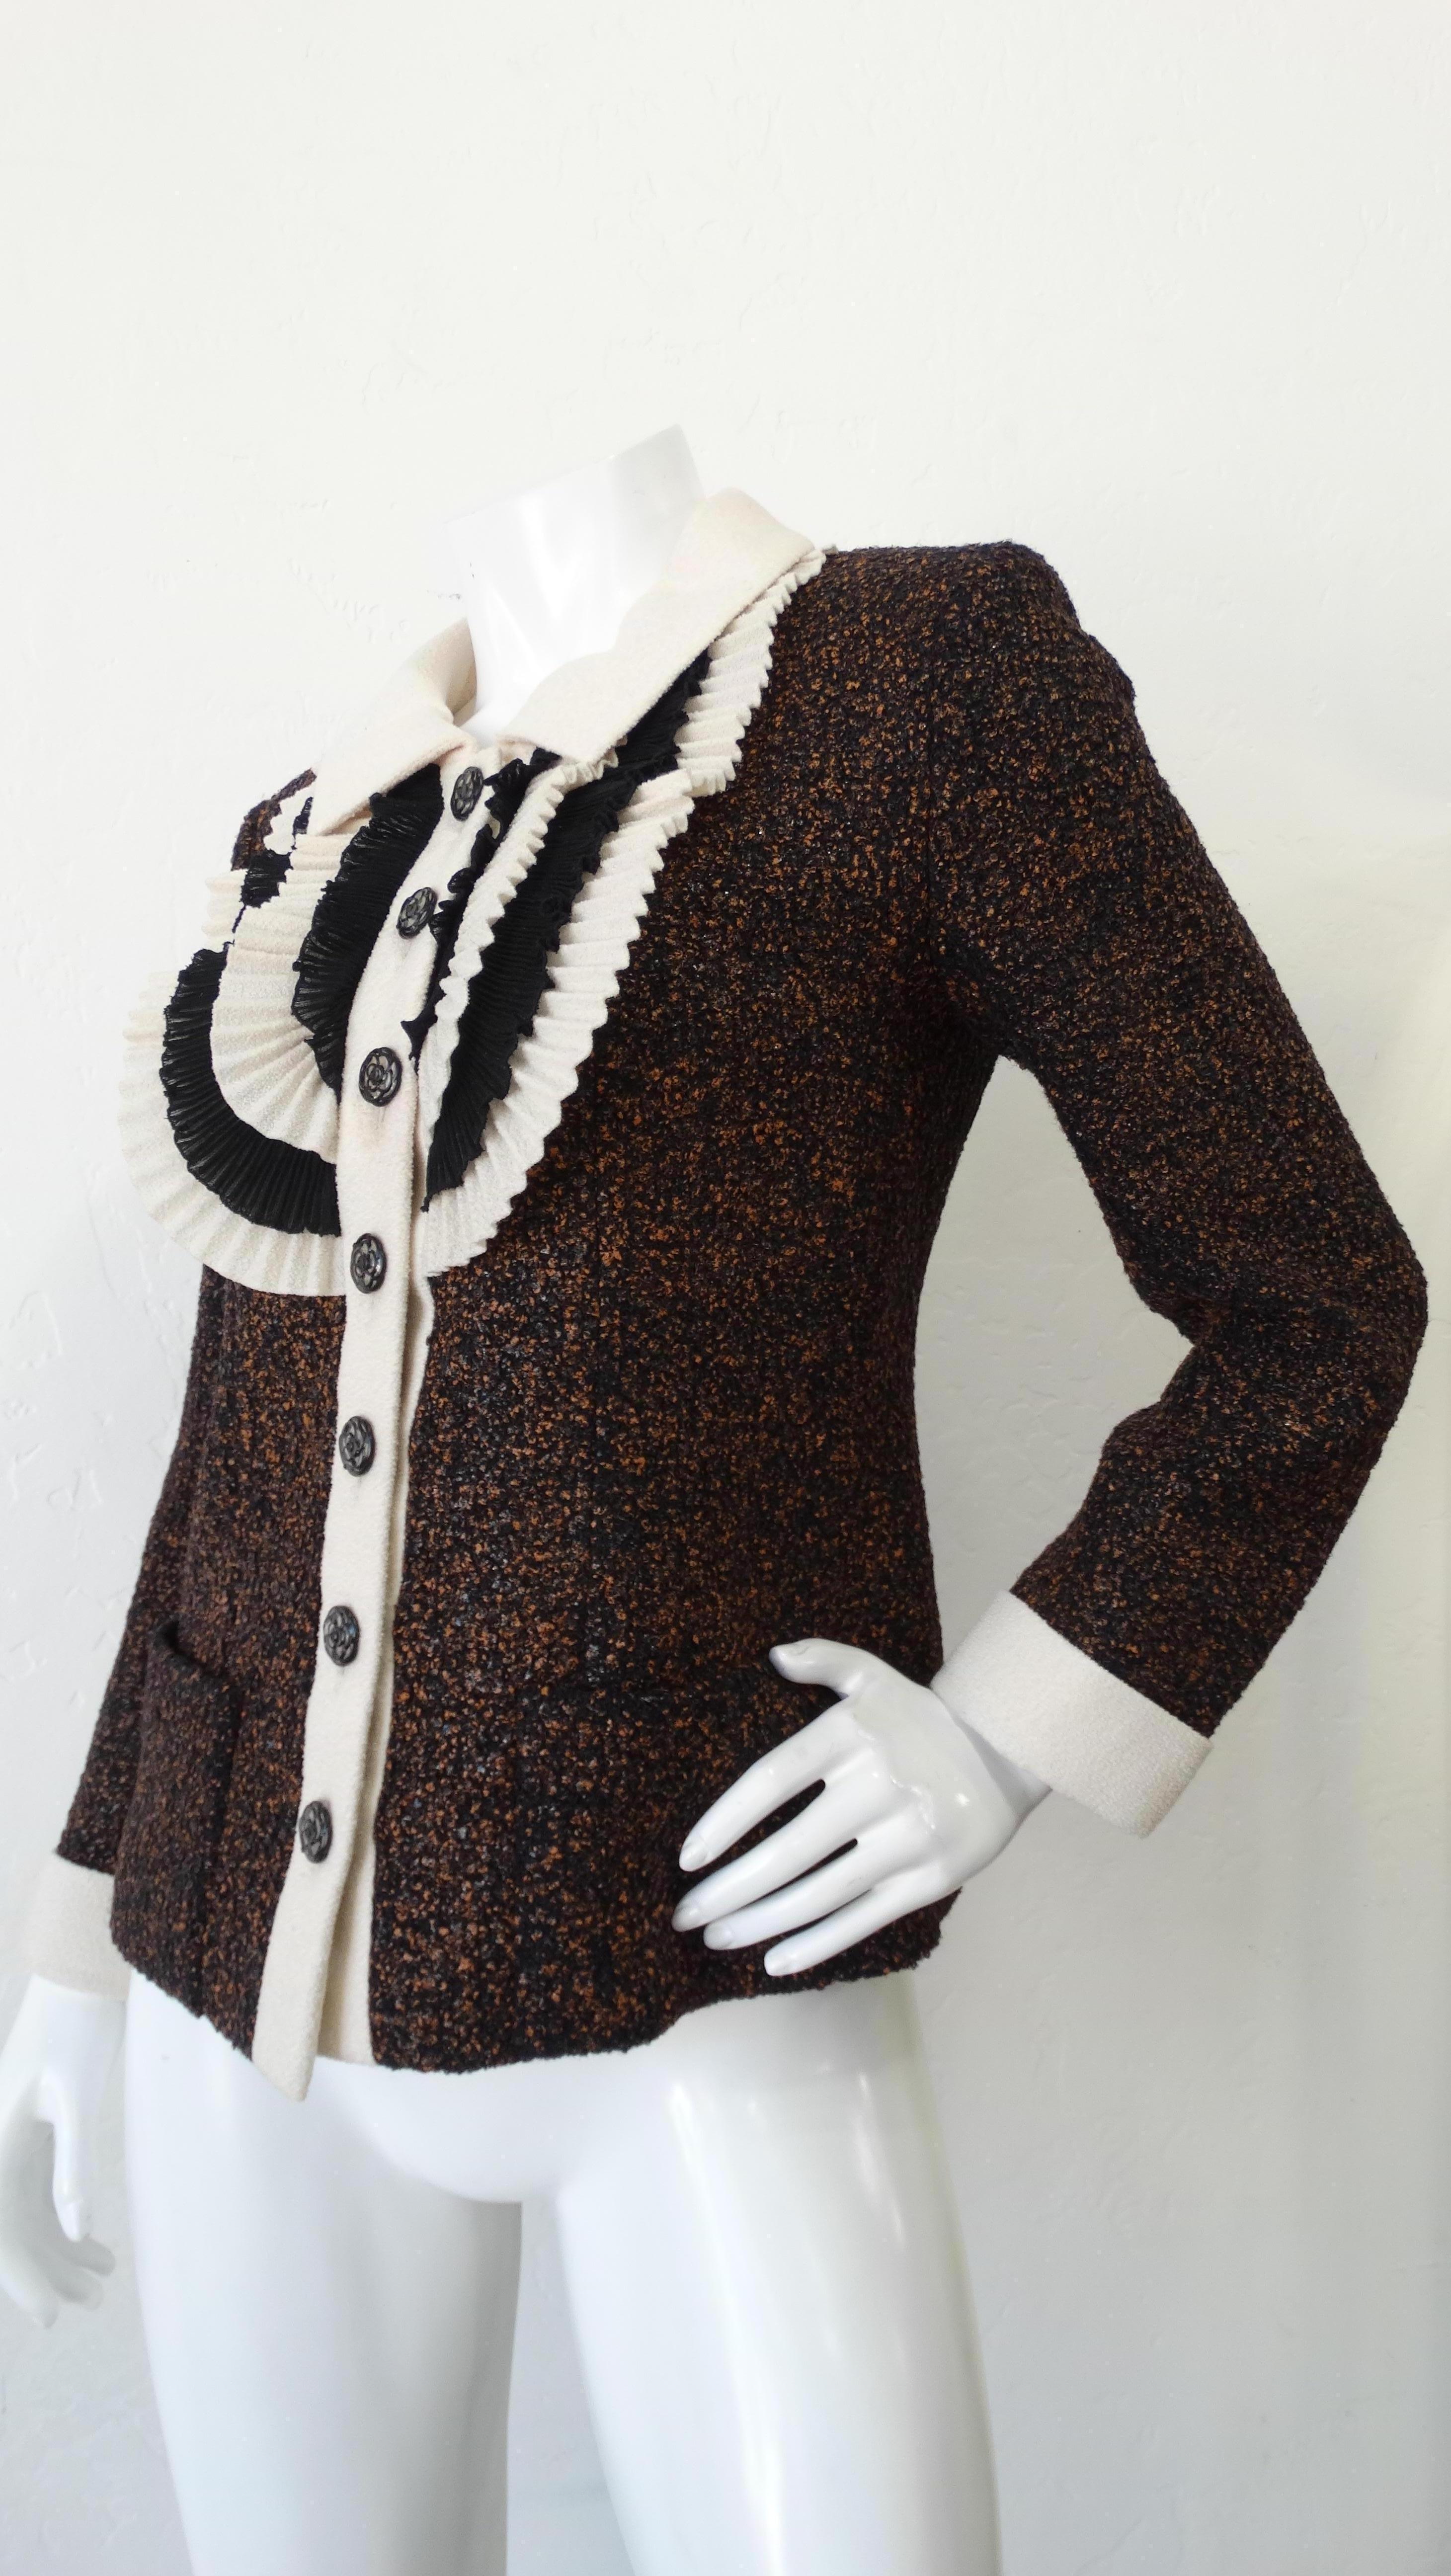 Channel your classic Chanel girl with this tweed jacket! Circa 2000s, this tweed jacket features a white terry cloth collar, cuffs and placket. Includes black and white layered pleating on the chest, Camellia flower buttons and two square front